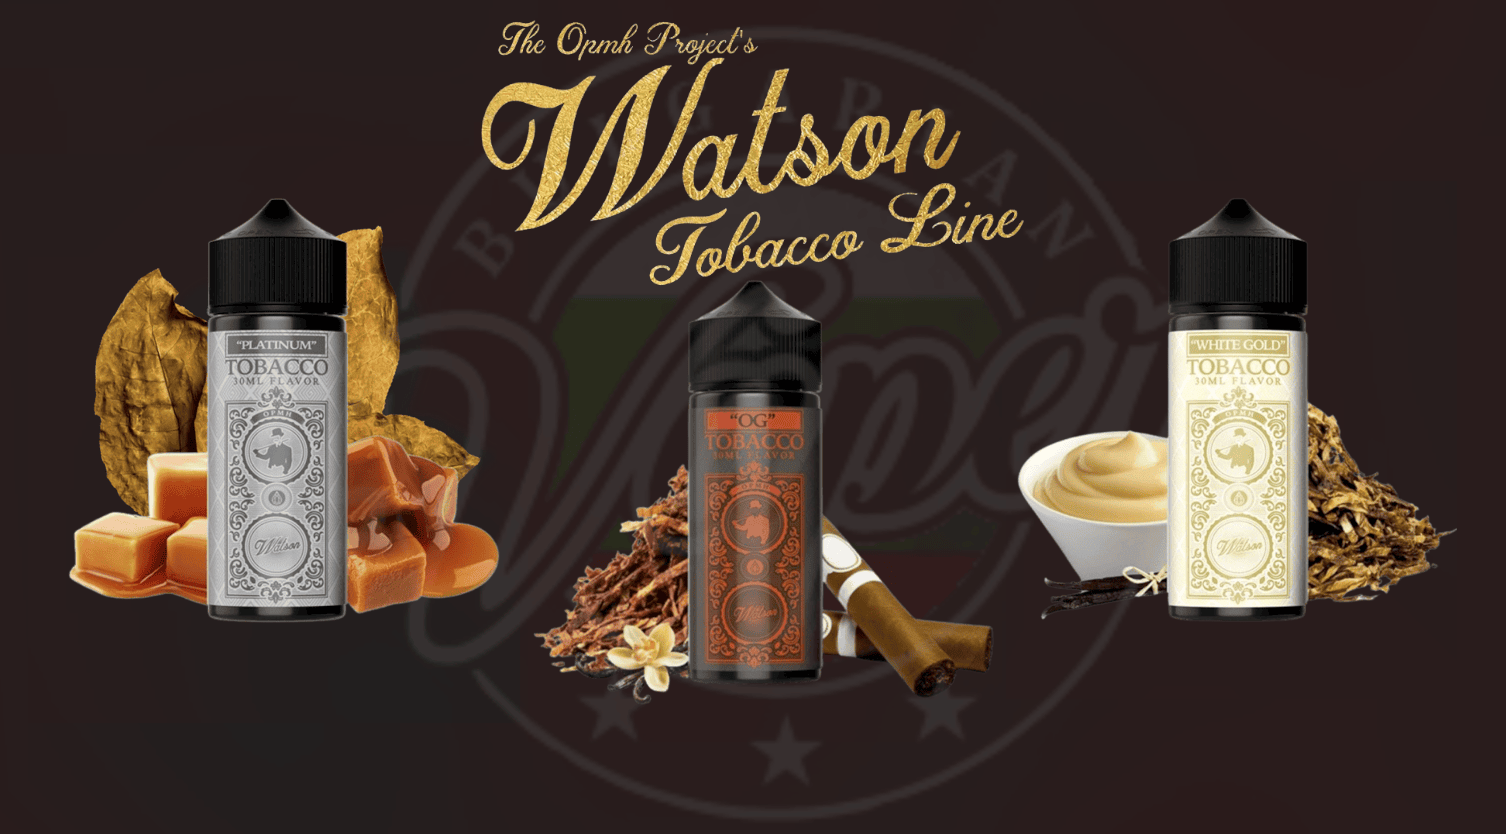 Watson Tobacco by OPMH Project